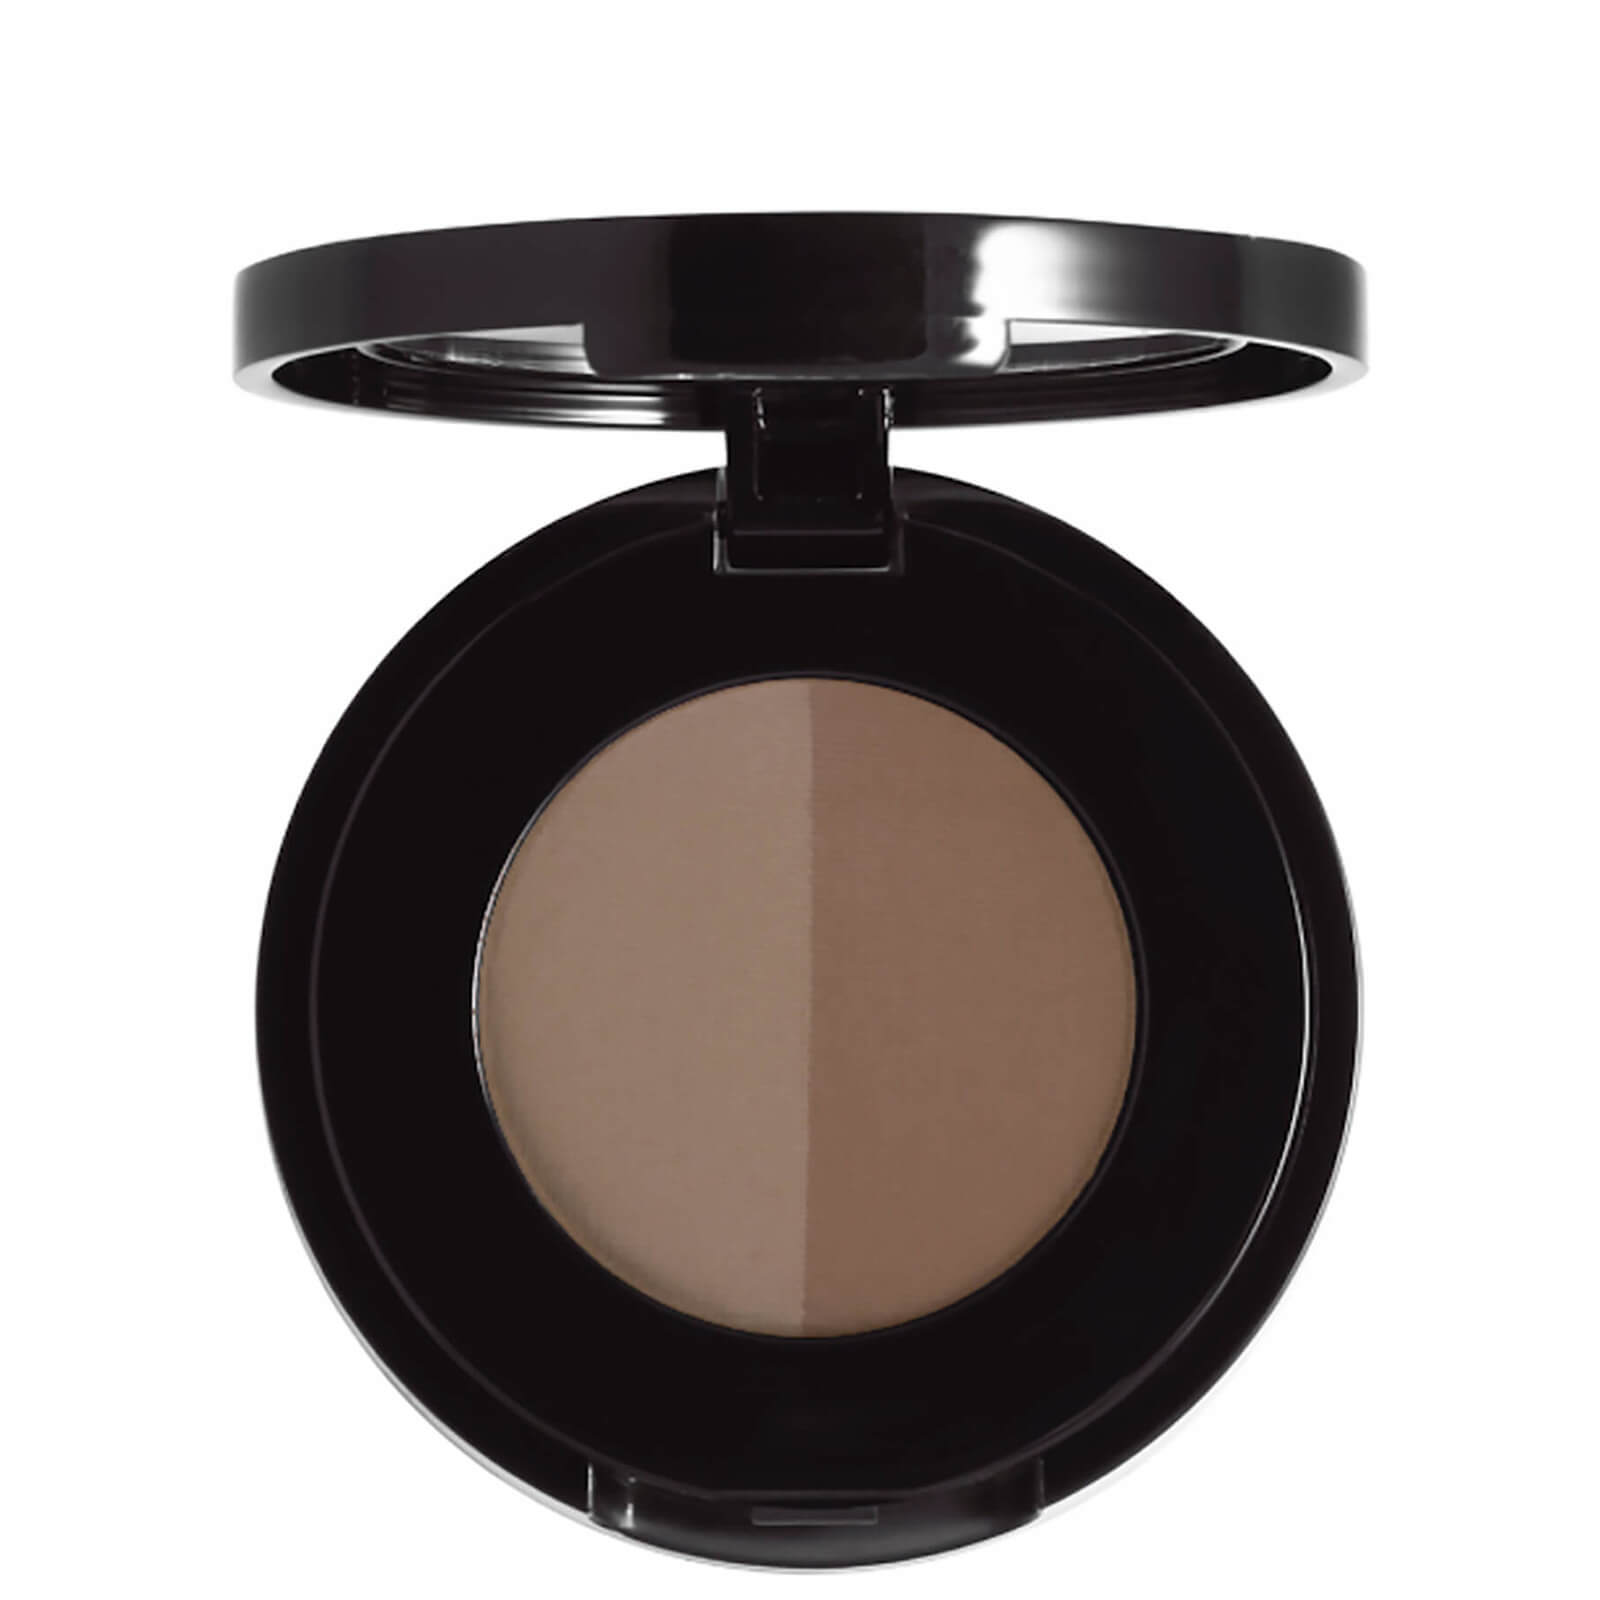 Anastasia Beverly Hills Brow Powder Duo 1.6g (Various Shades) - Soft Brown